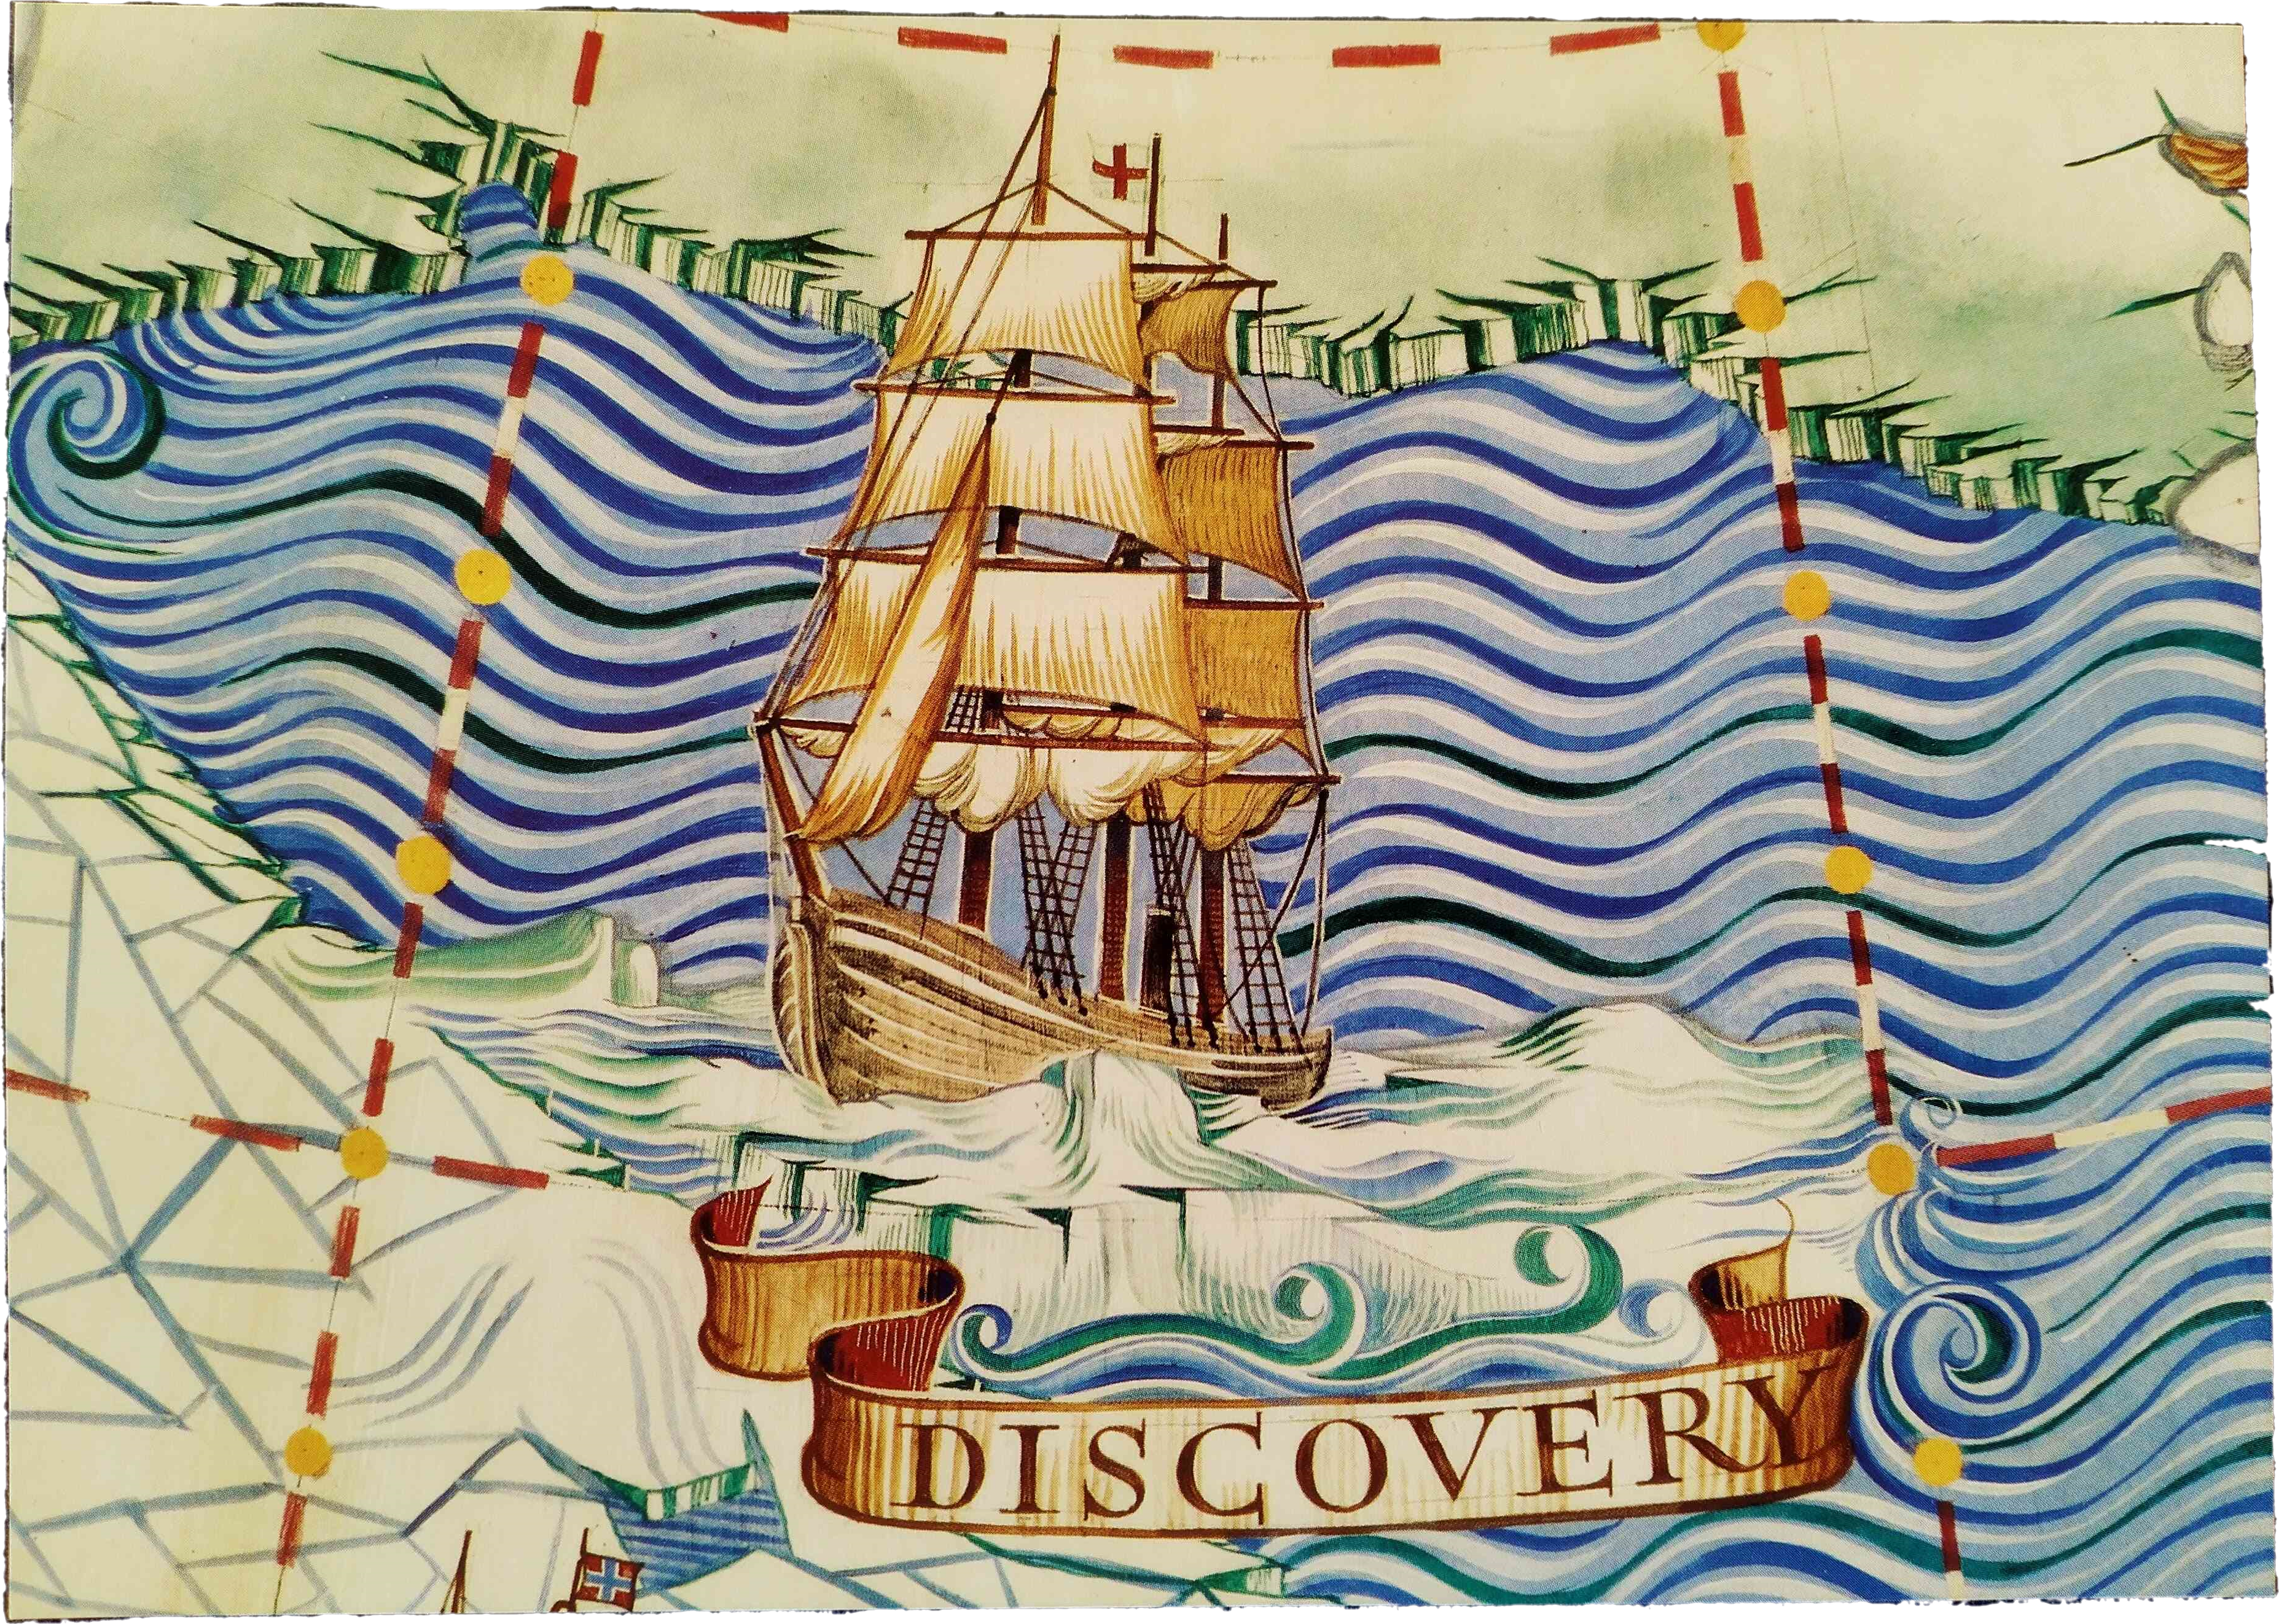 A painting in the style of an old map with a ship in the centre labeled as 'Discovery'